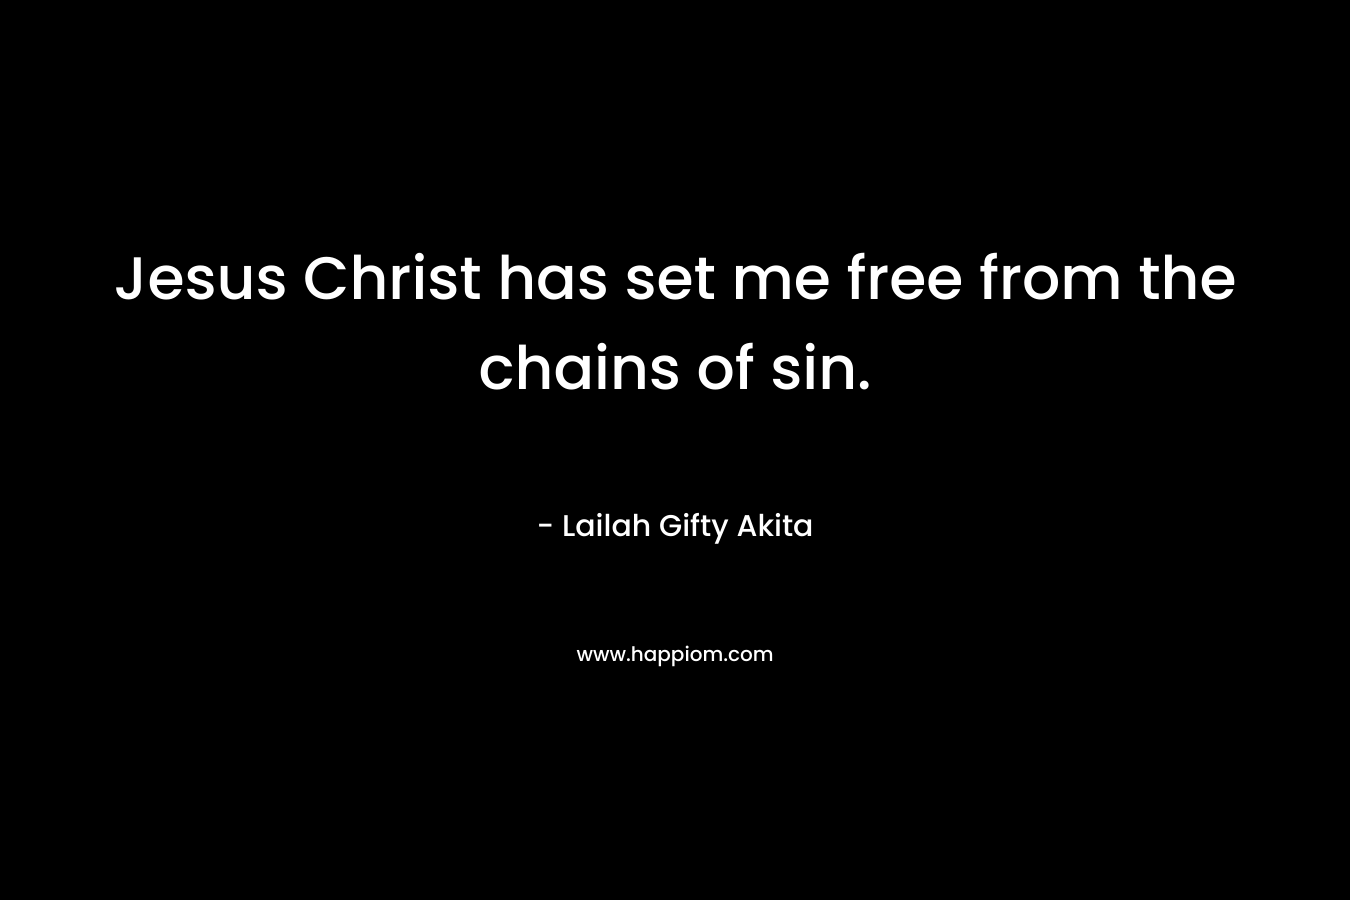 Jesus Christ has set me free from the chains of sin. – Lailah Gifty Akita